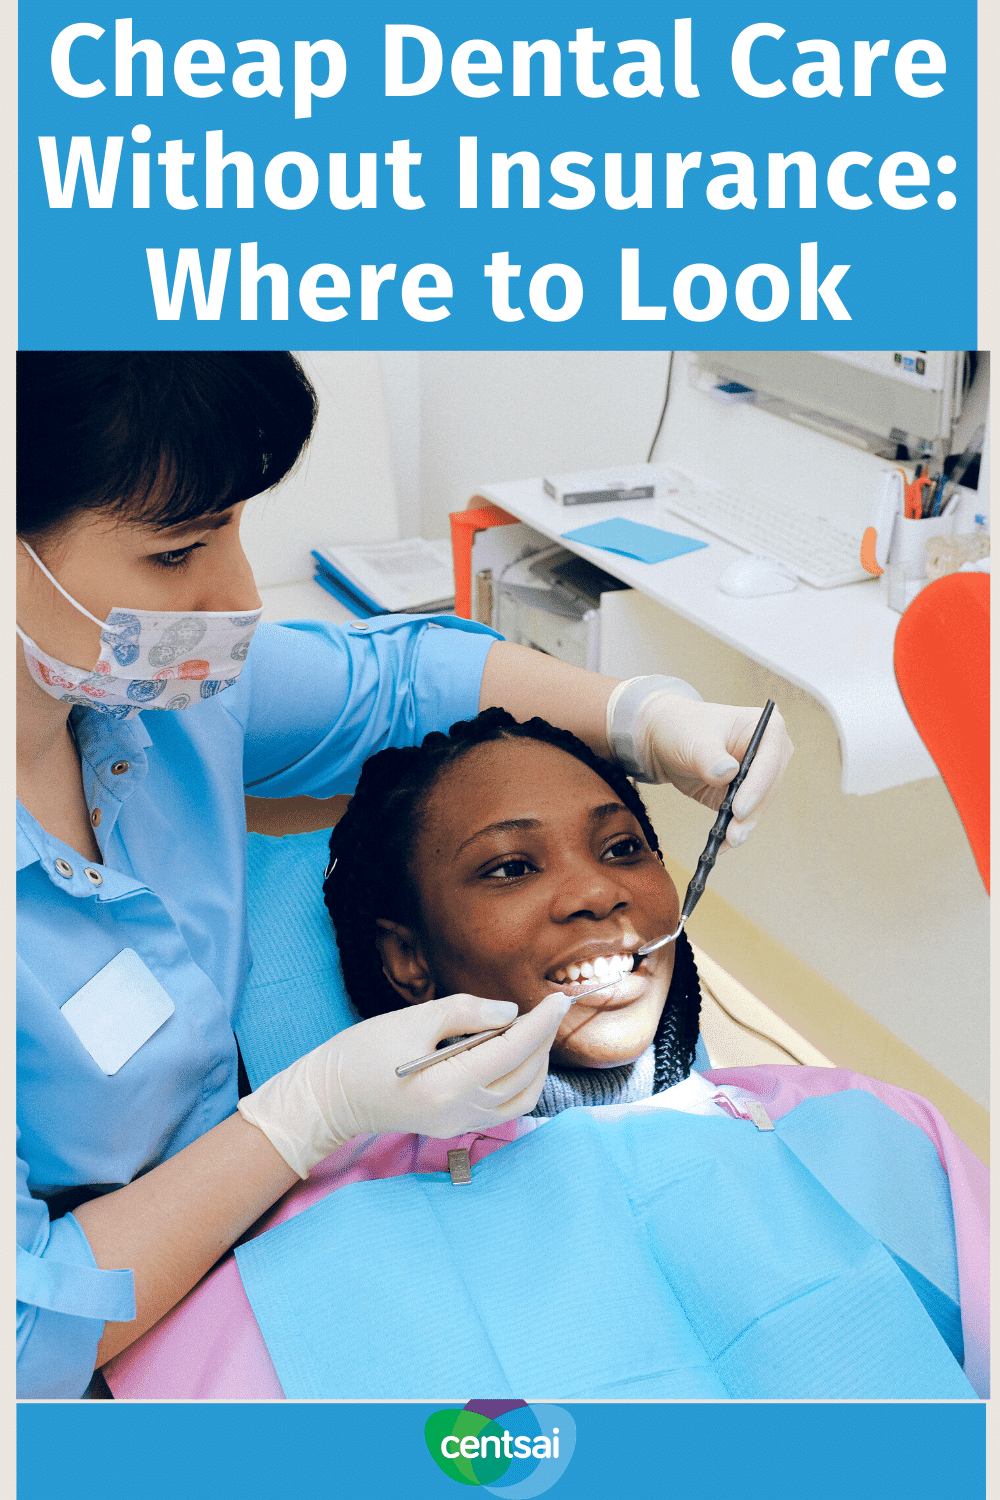 Cheap Dental Care without insurance where to look